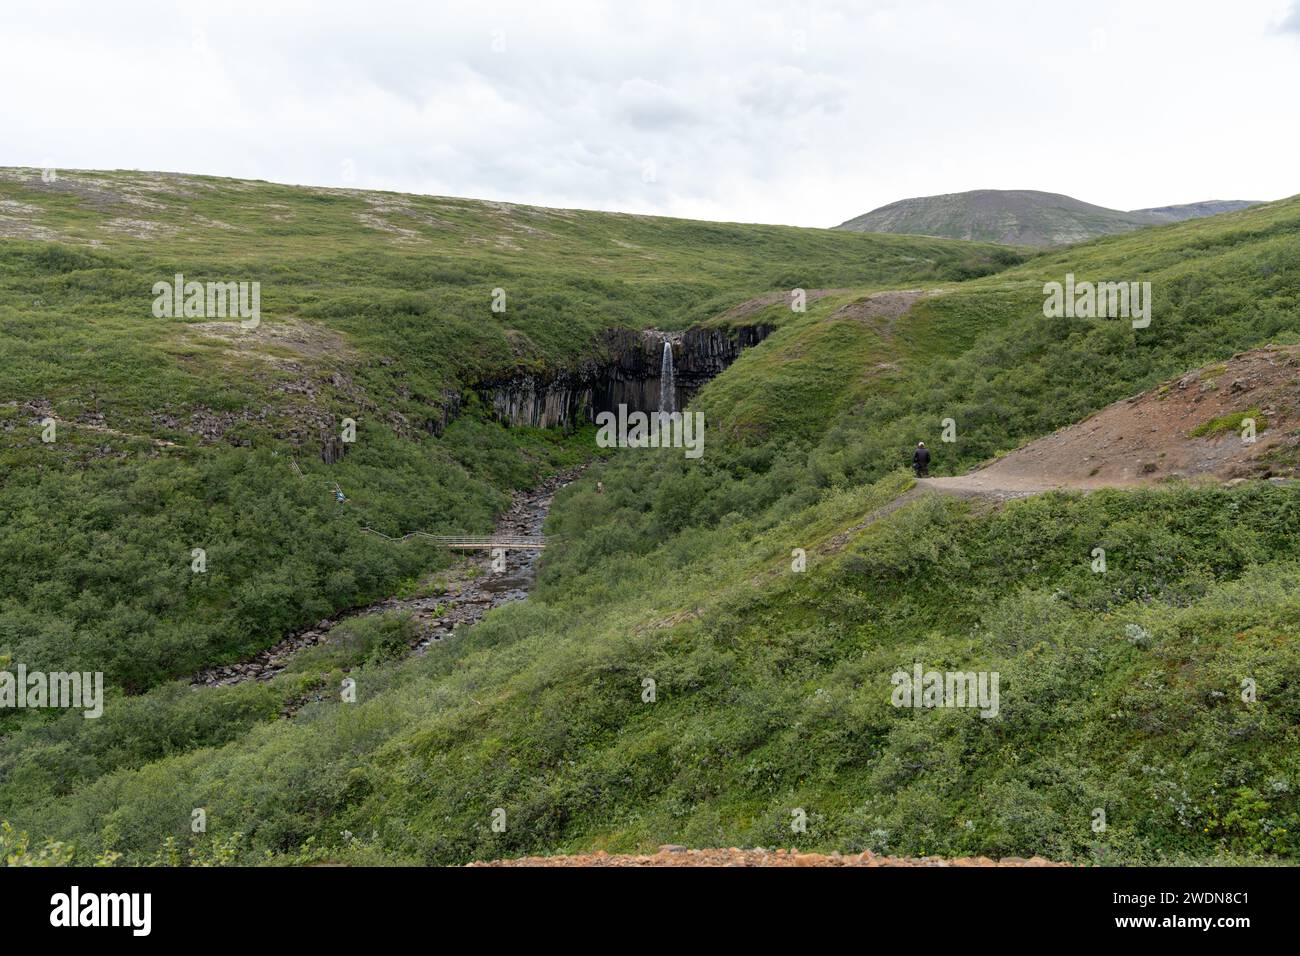 Distant view of the Svartifoss waterfall from the hiking trail. Iceland Stock Photo